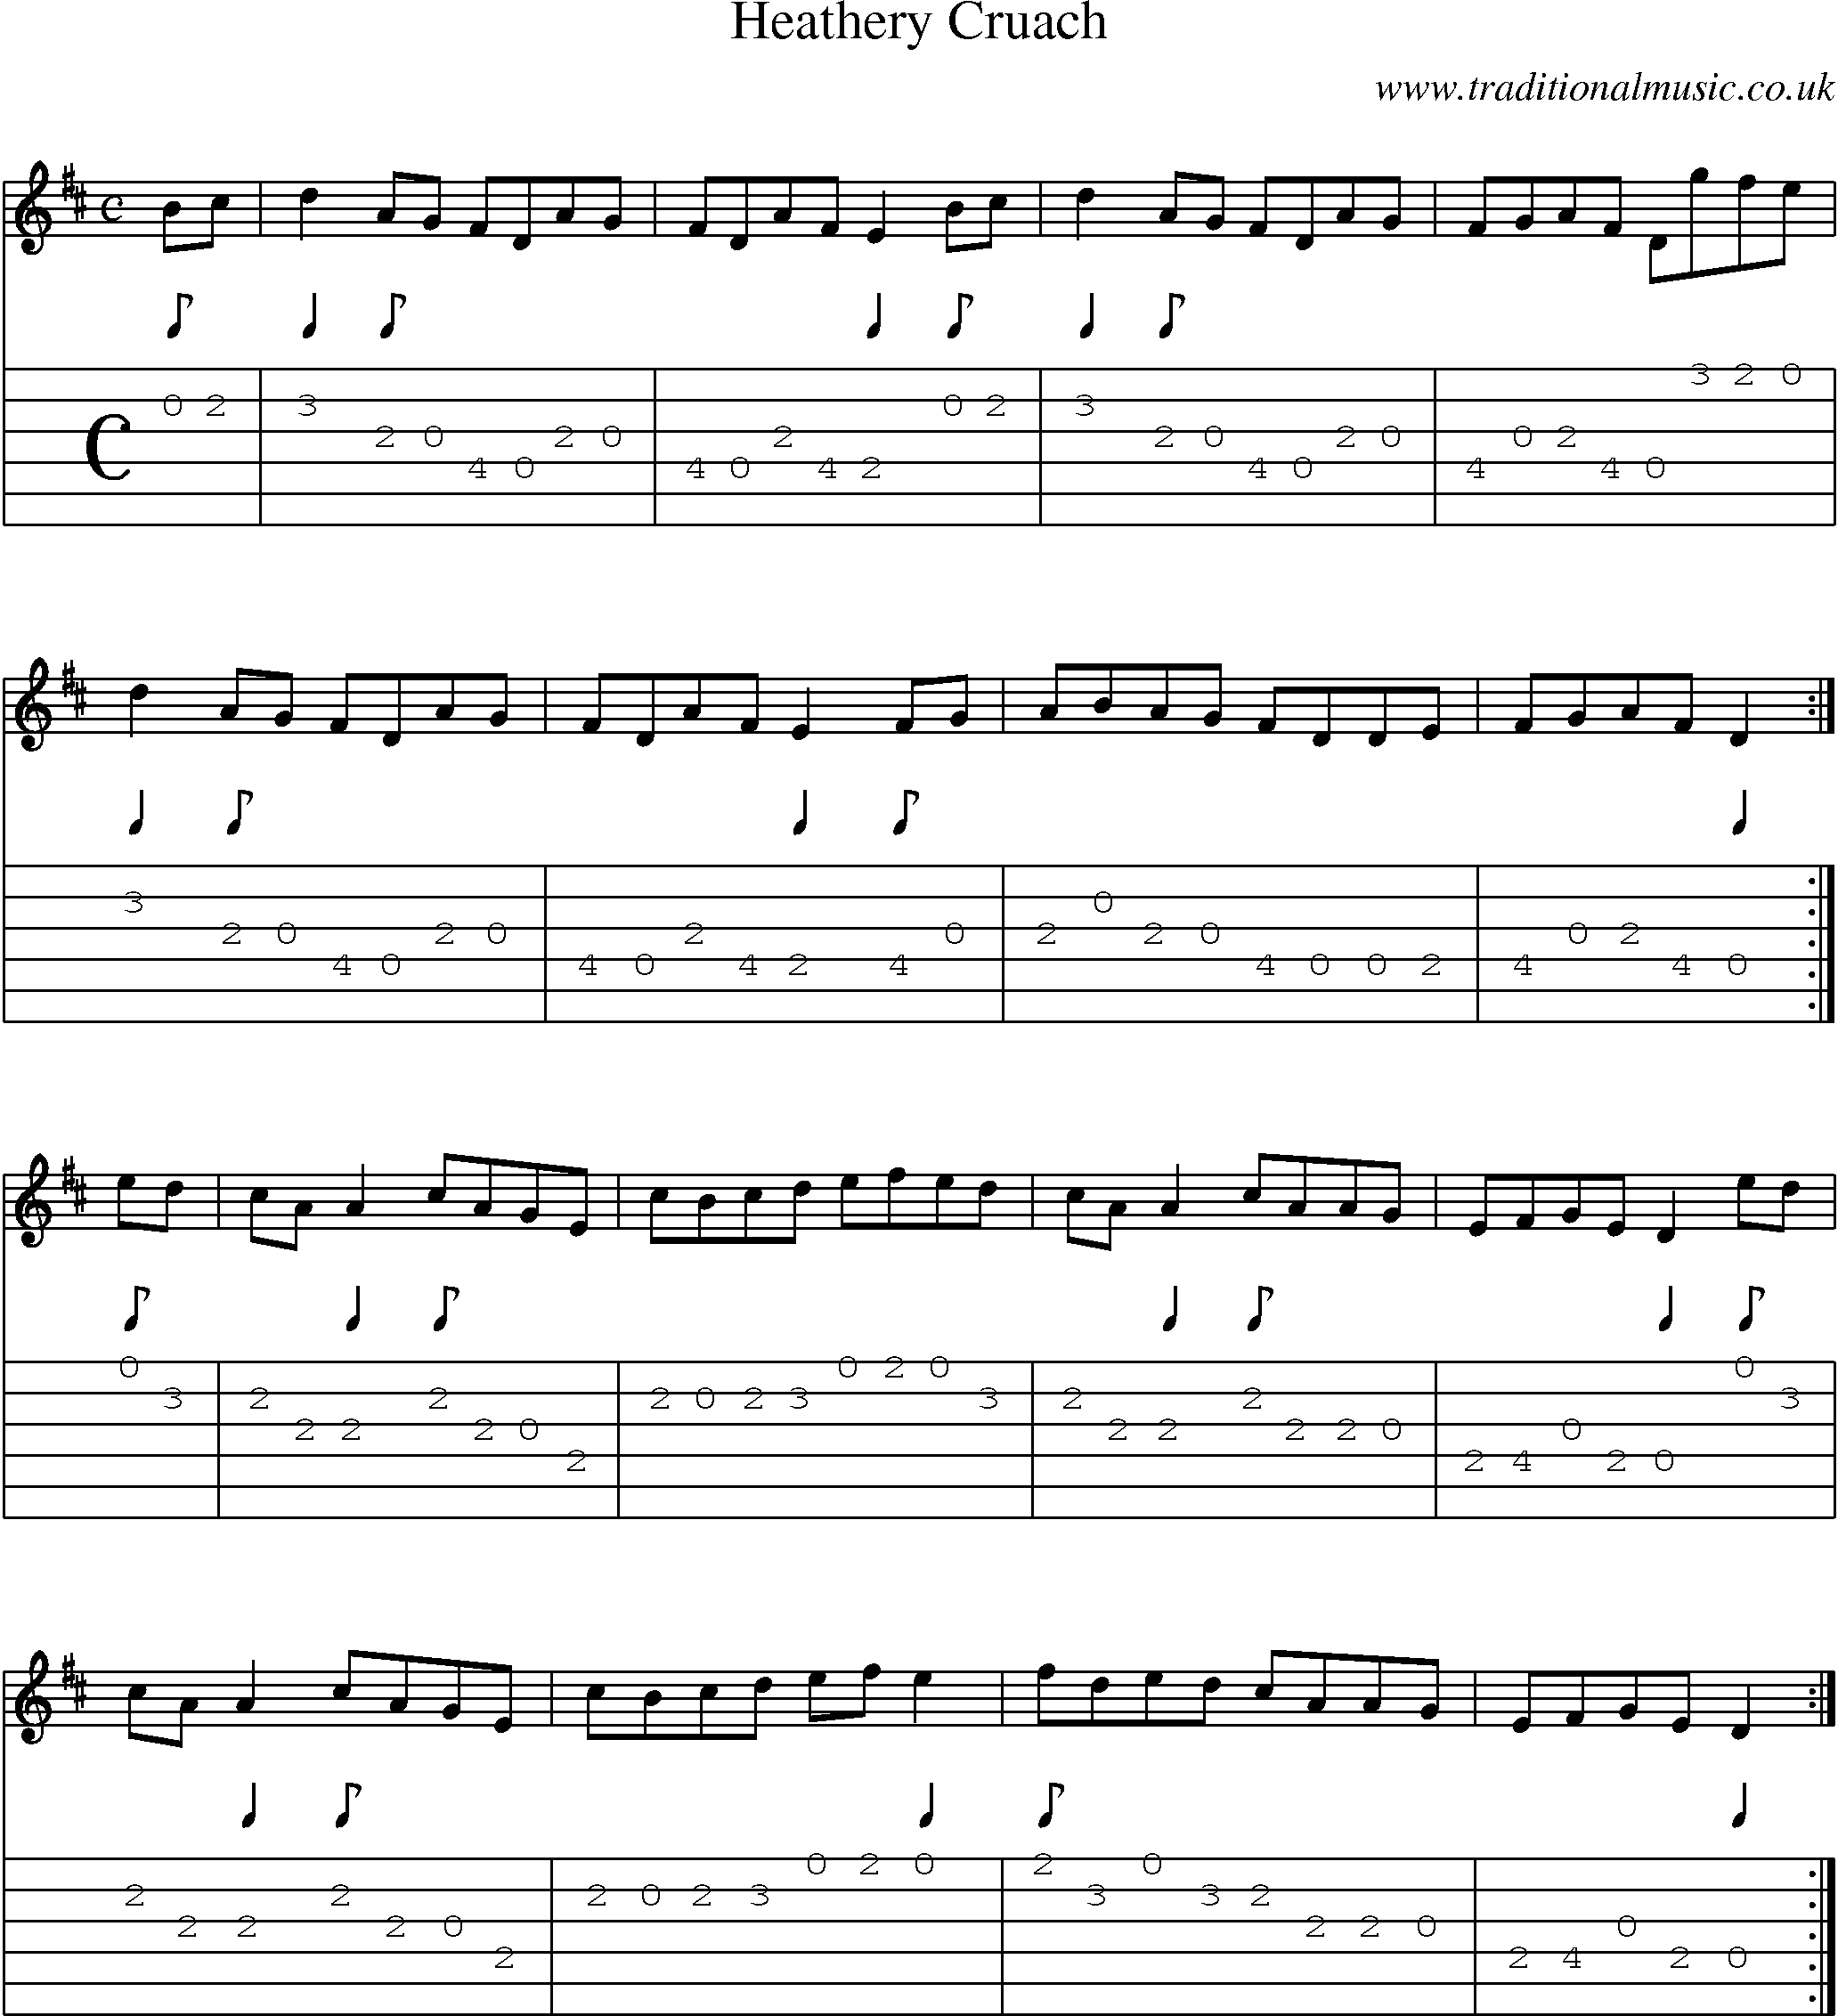 Music Score and Guitar Tabs for Heathery Cruach